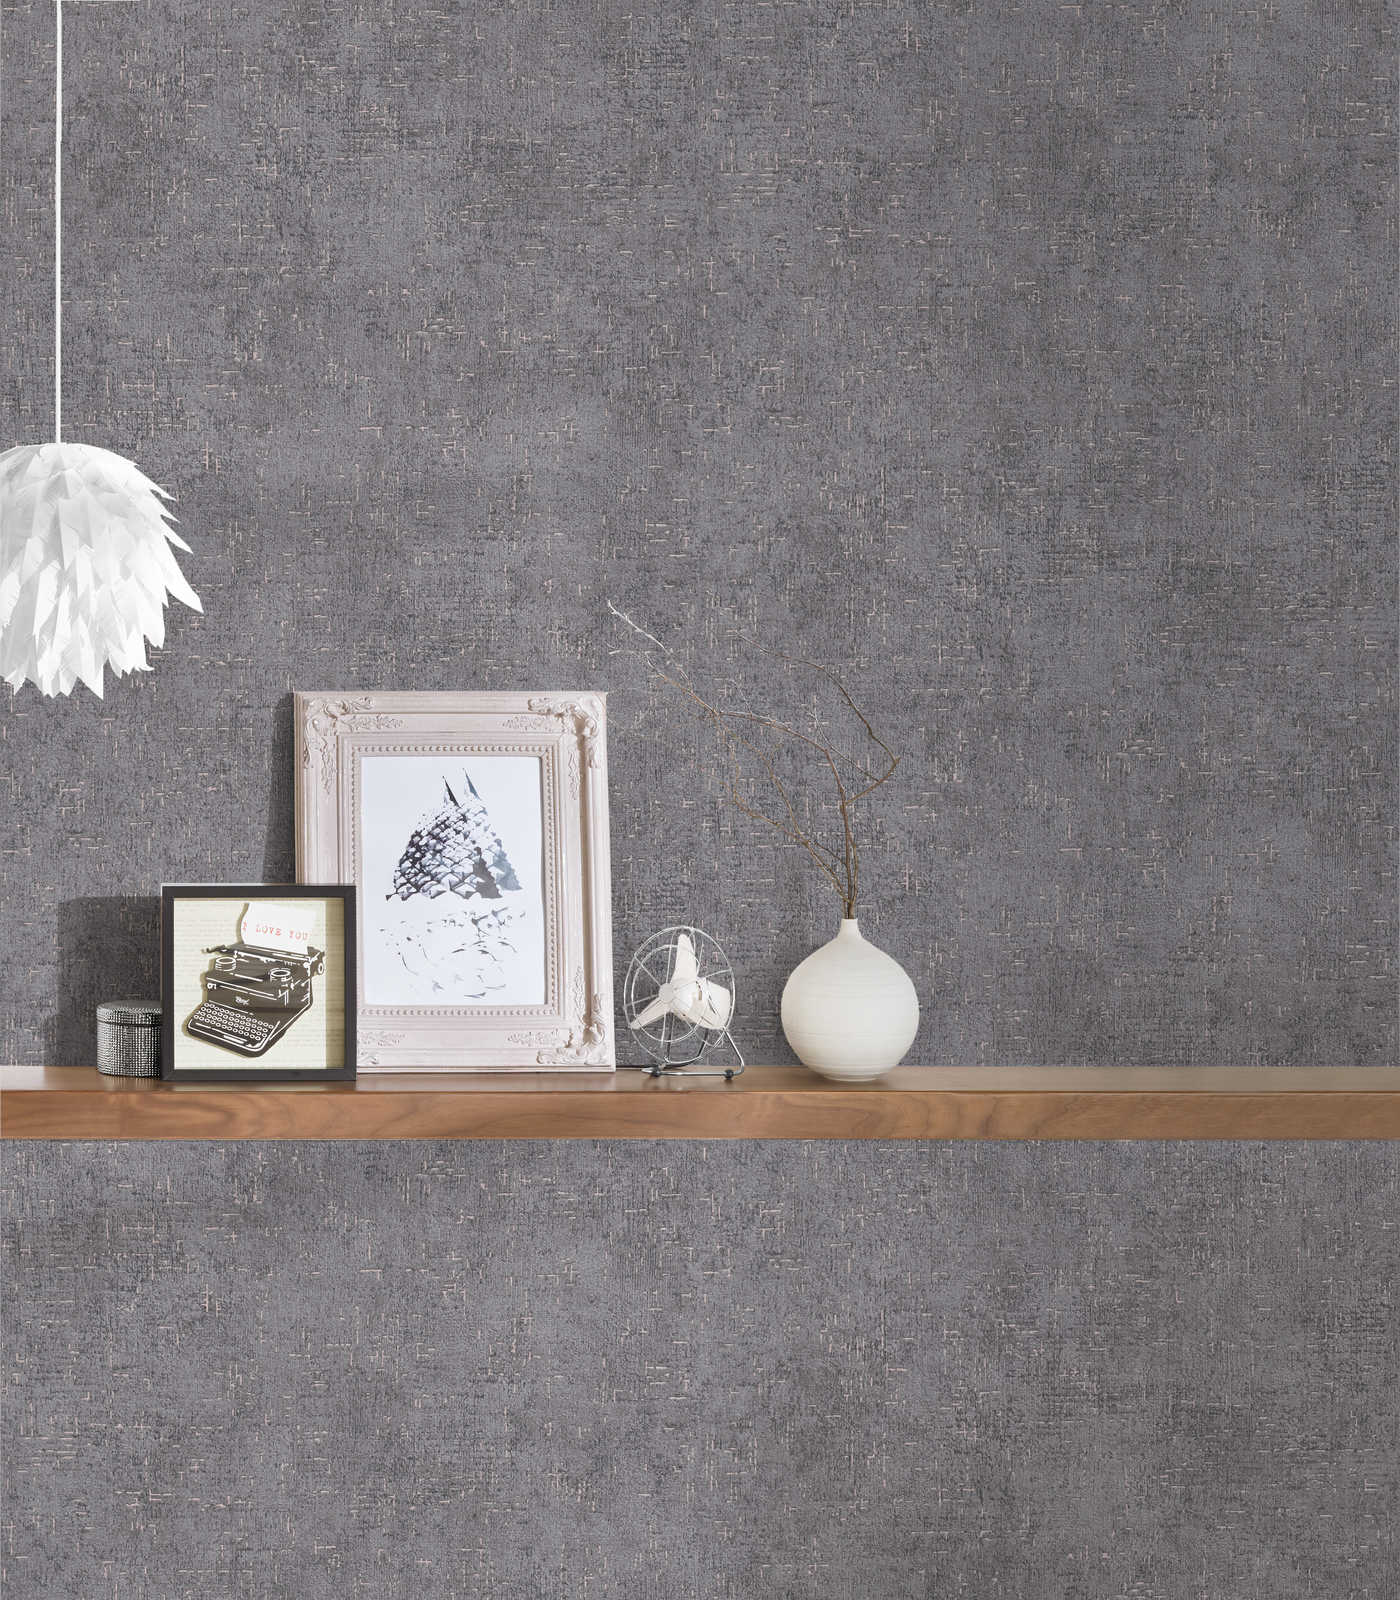             Wallpaper grey & gold with rustic texture design
        